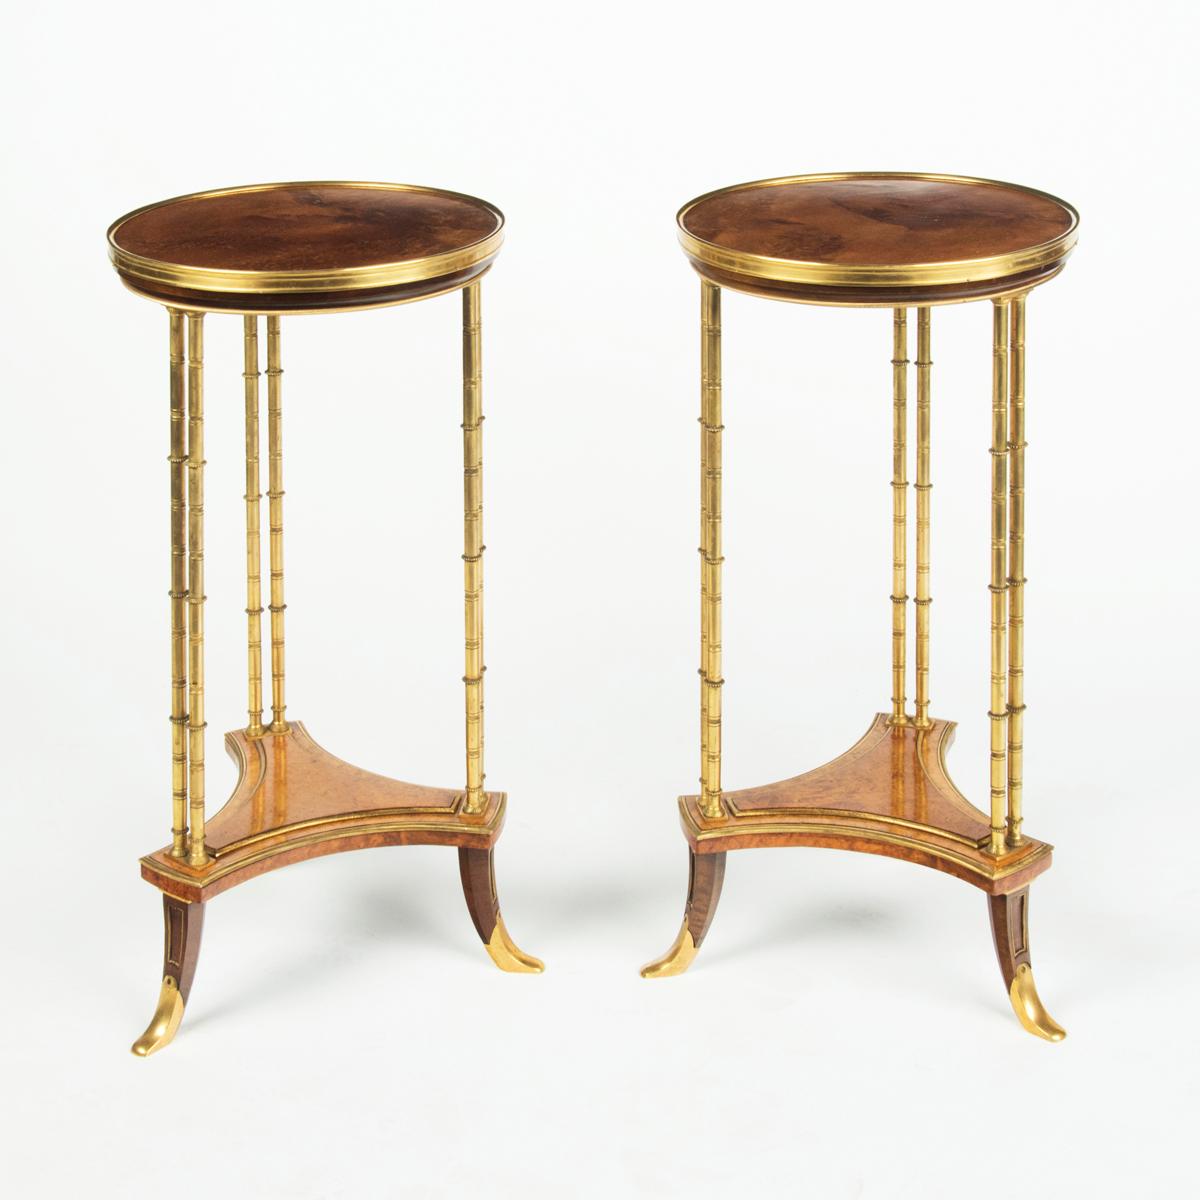 A pair of Louis XVI style mahogany and ormolu gueridons, after Adam Weisweiler, each with a circular amboyna veneered top and triform undertier enclosed within three pairs of simulated bamboo columns, with applied openwork bronze borders.  French,